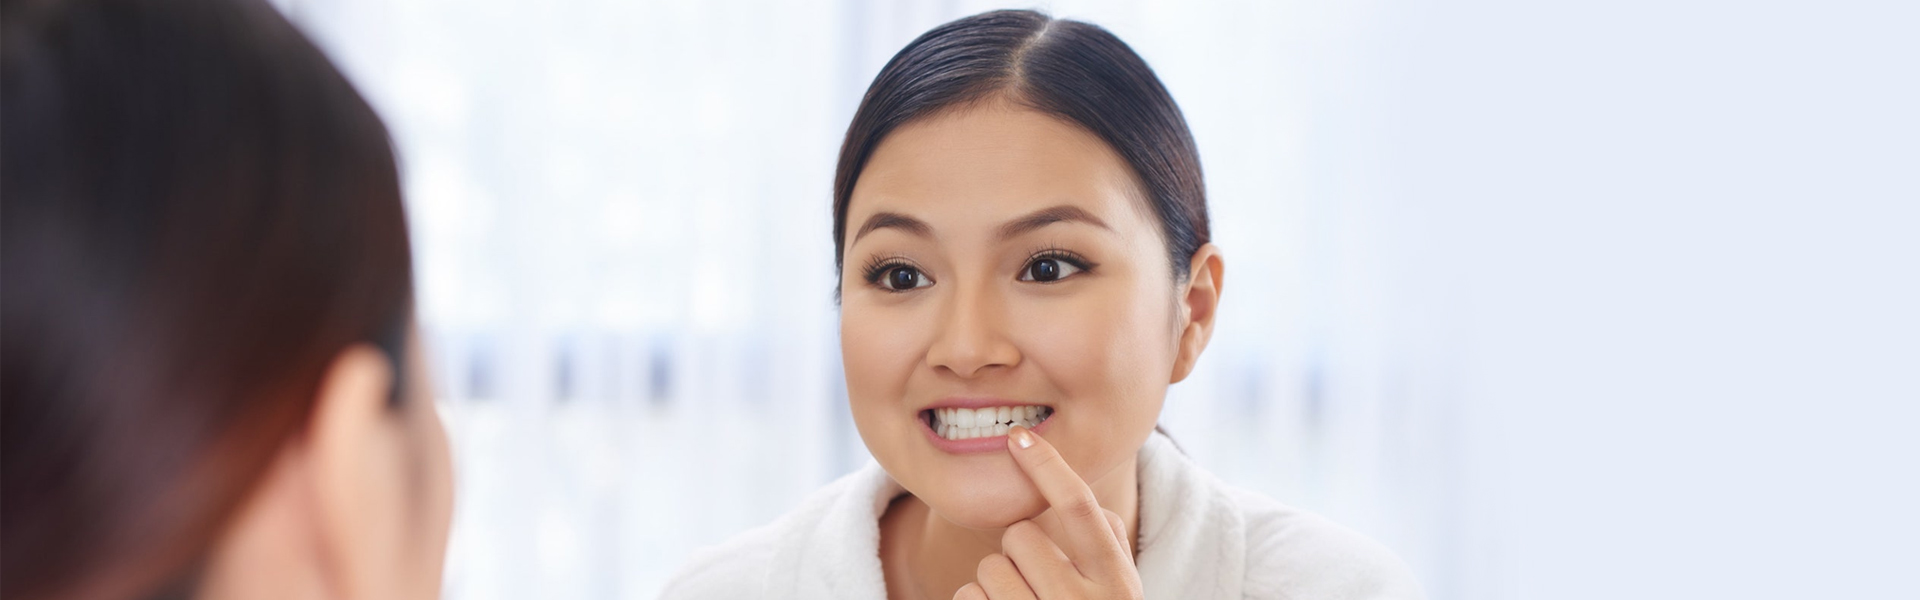 How to Permanently Replace Missing Teeth Using Dental Implants   